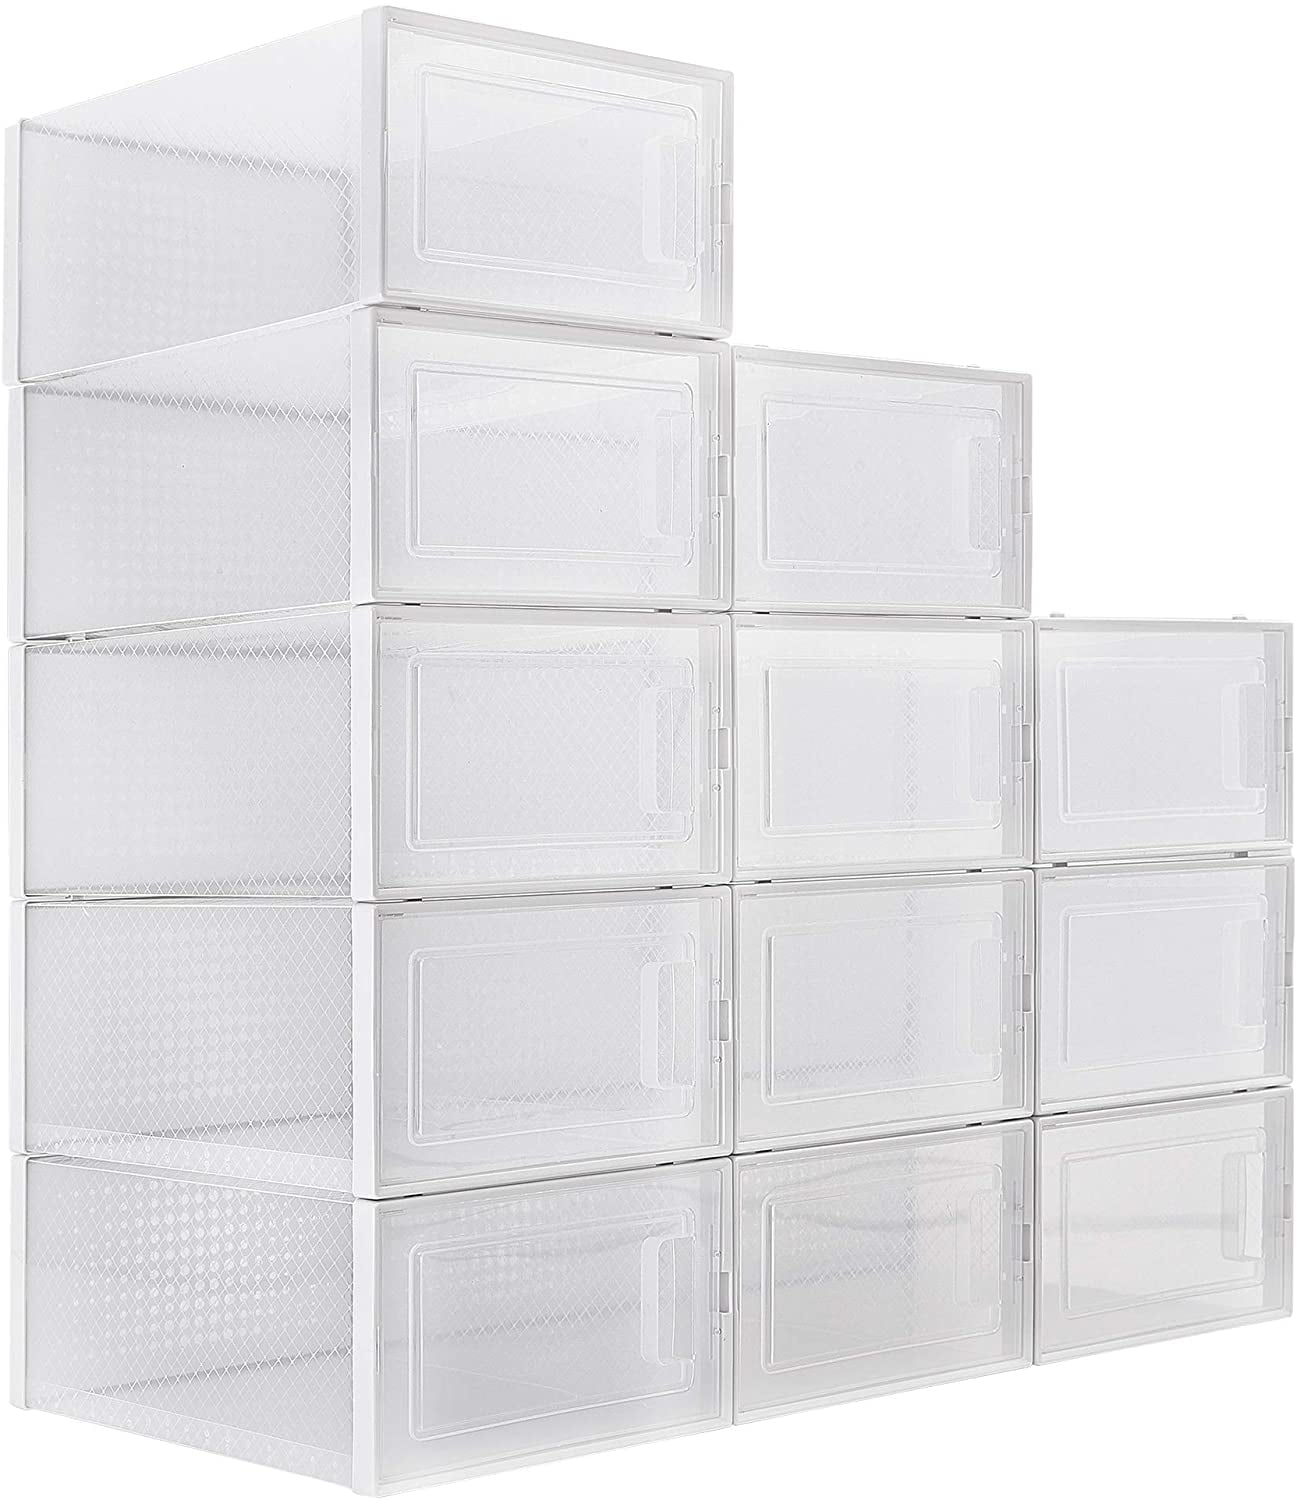 Pack of 10 12 Foldable Plastic Shoe Boxes Drawer Stackable Storage Organiser Box 